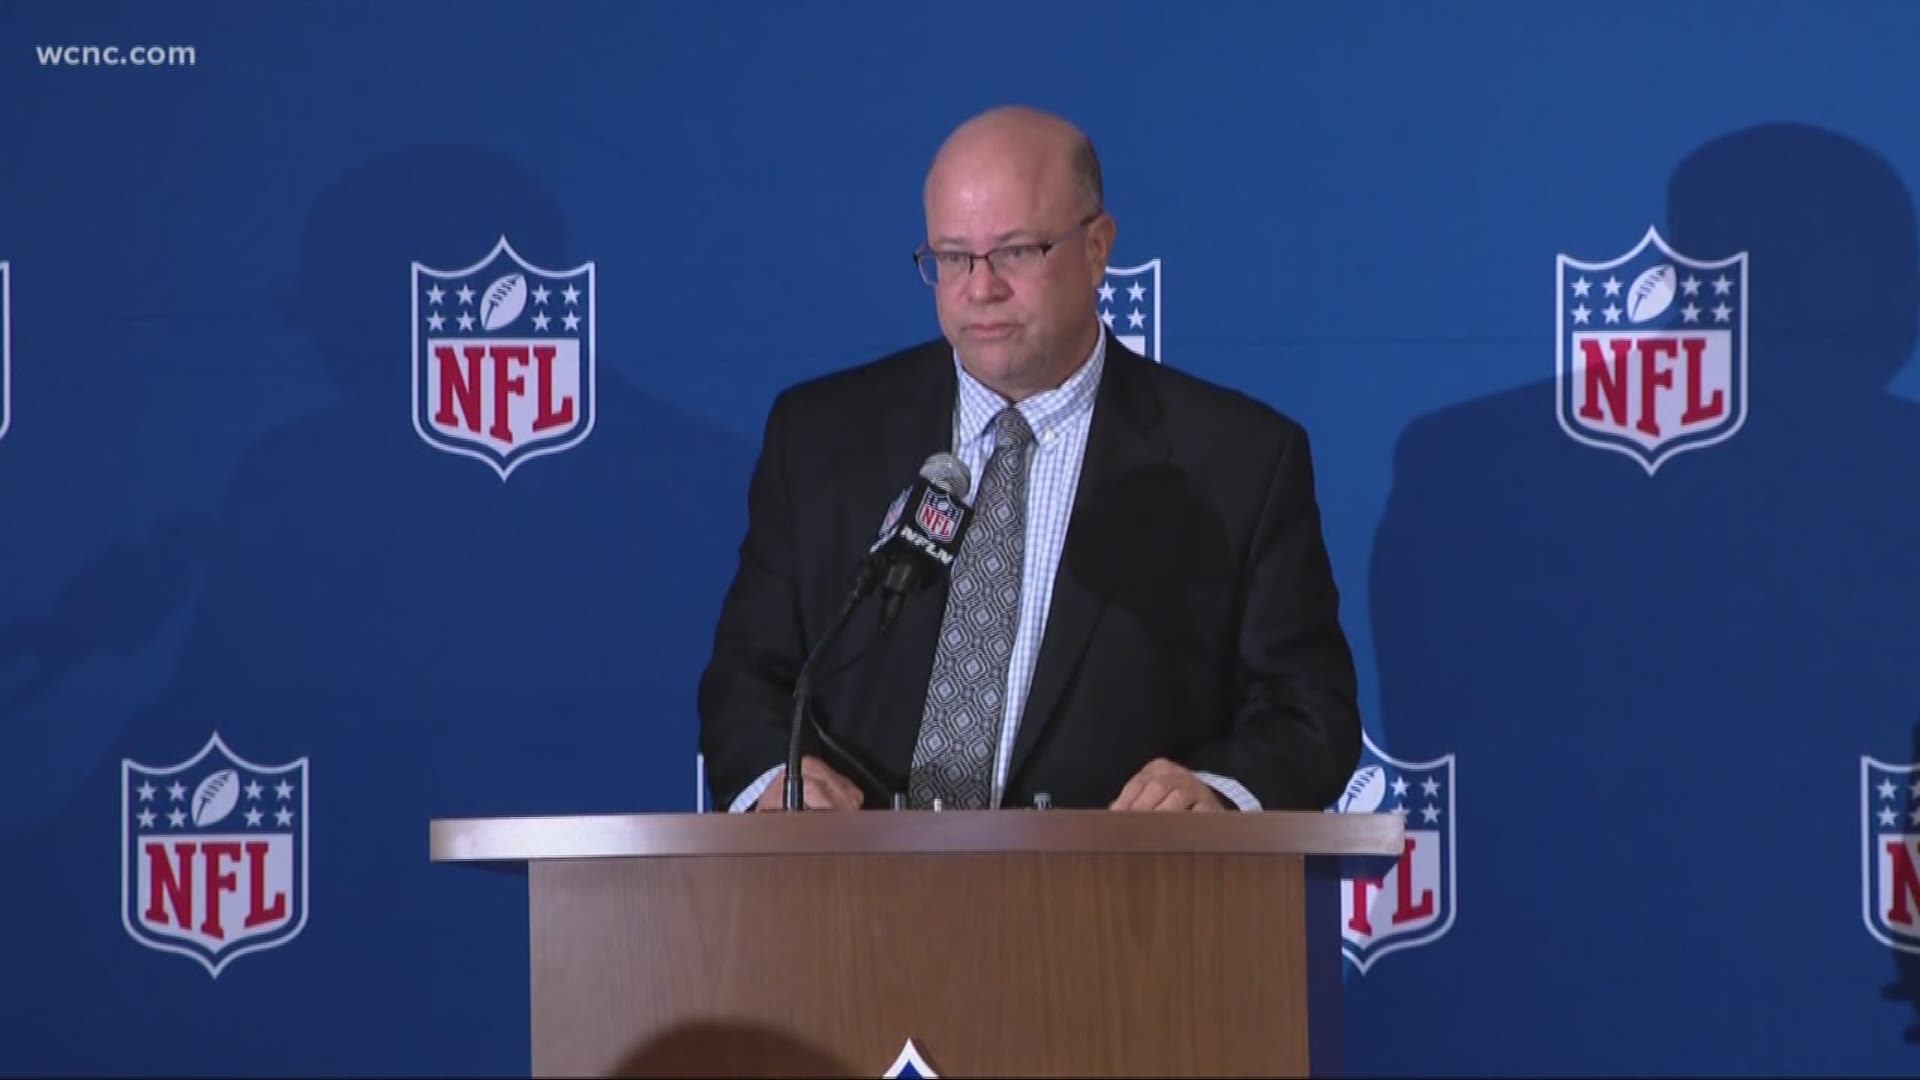 The NFL approved David Tepper's purchase of the Carolina Panthers at the spring meetings Tuesday. And the new owner quickly told fans the team isn't going anywhere.